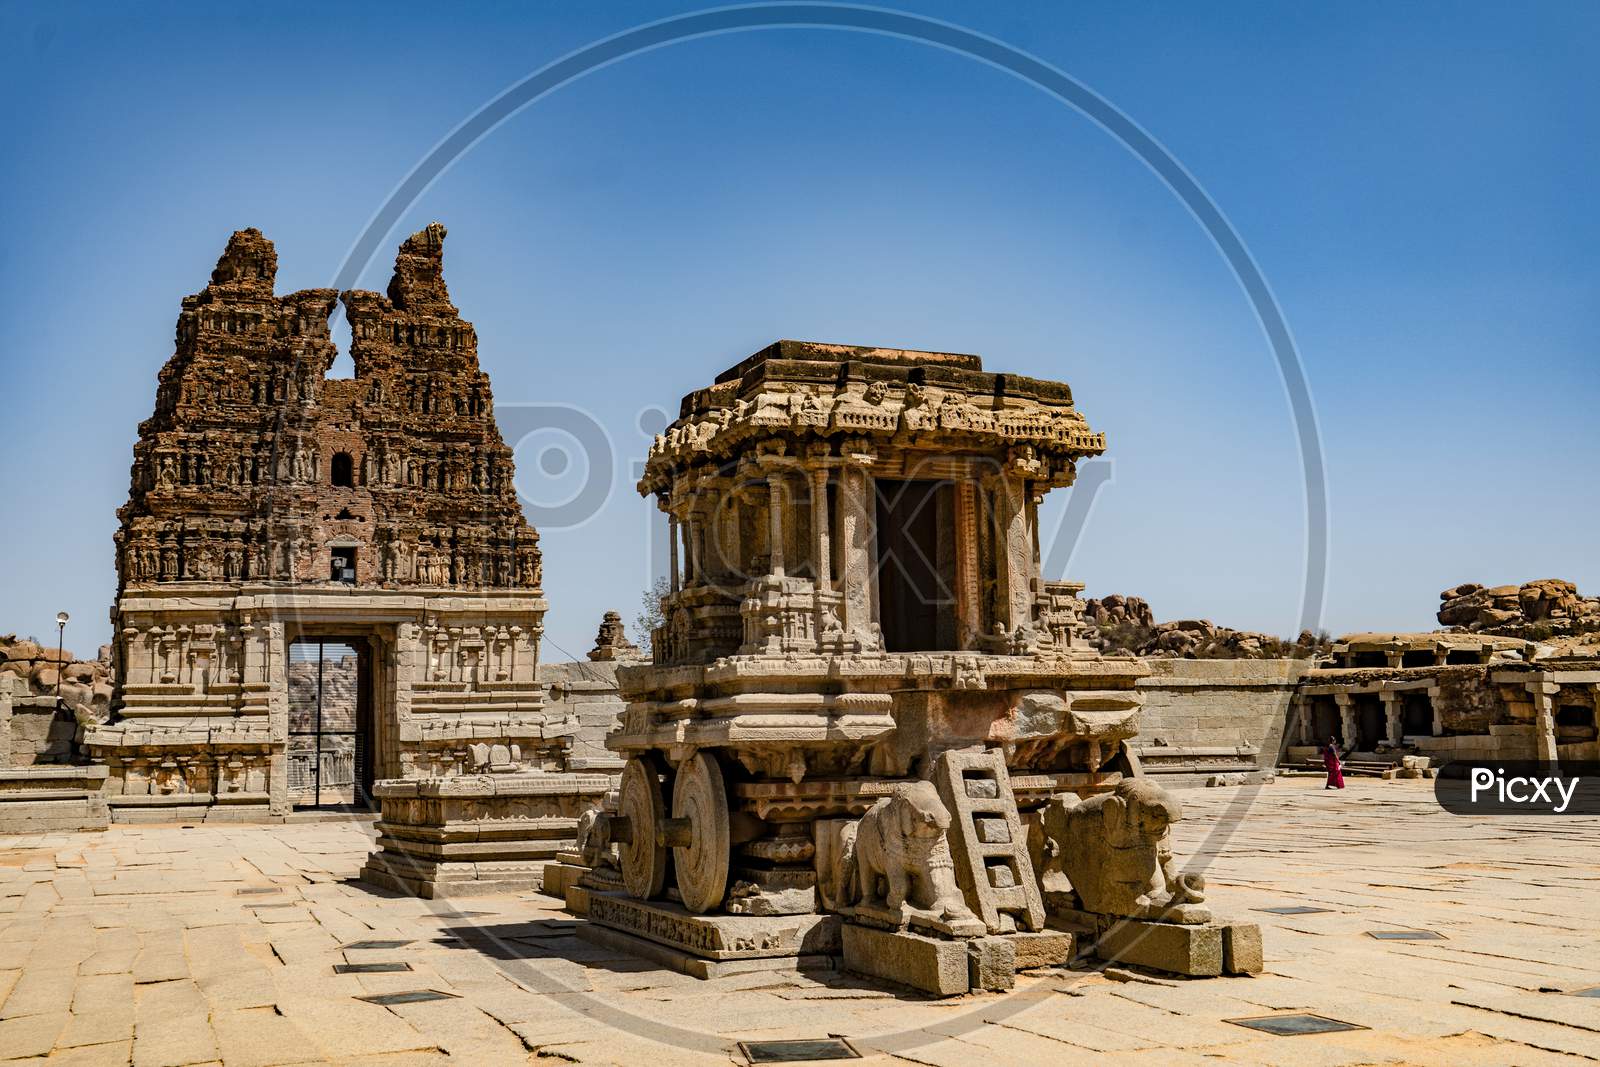 The Vitthala temple has a Garuda shrine in the form of a stone chariot in the courtyard; it is an often-pictured symbol of Hampi.